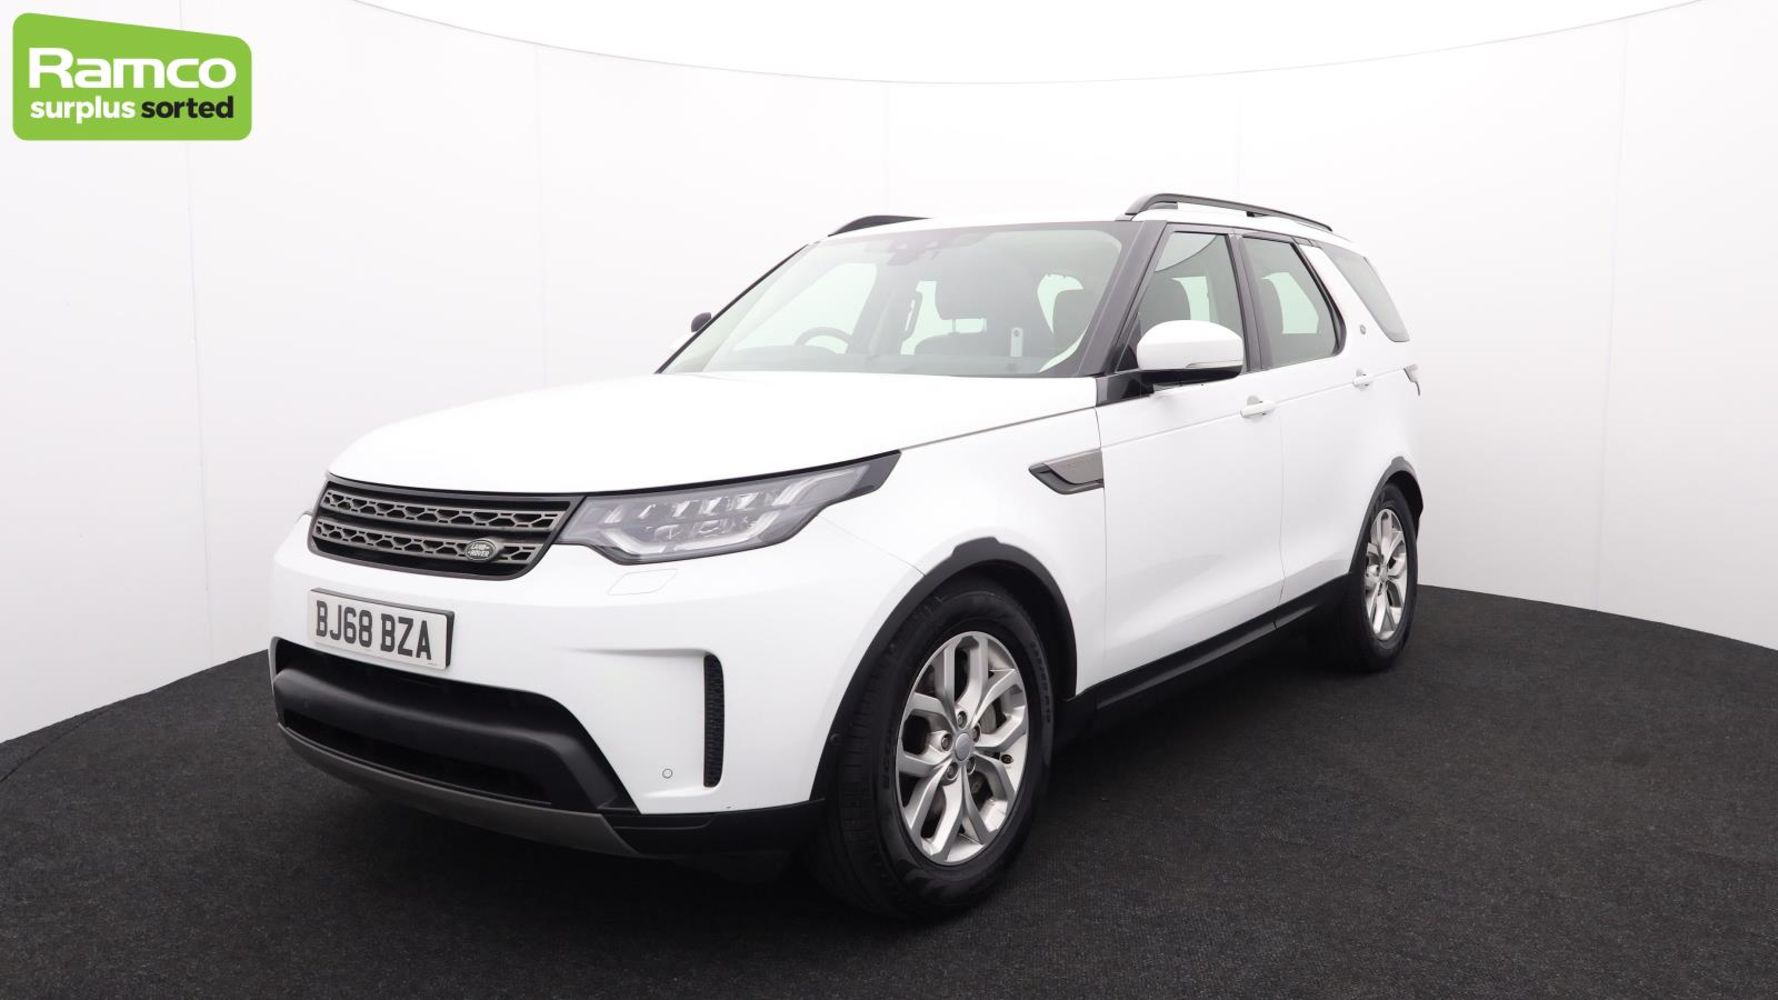 Direct from National Highways – 2018 & 2017 Land Rover Discovery 5 & 2019 SsangYong Mussos